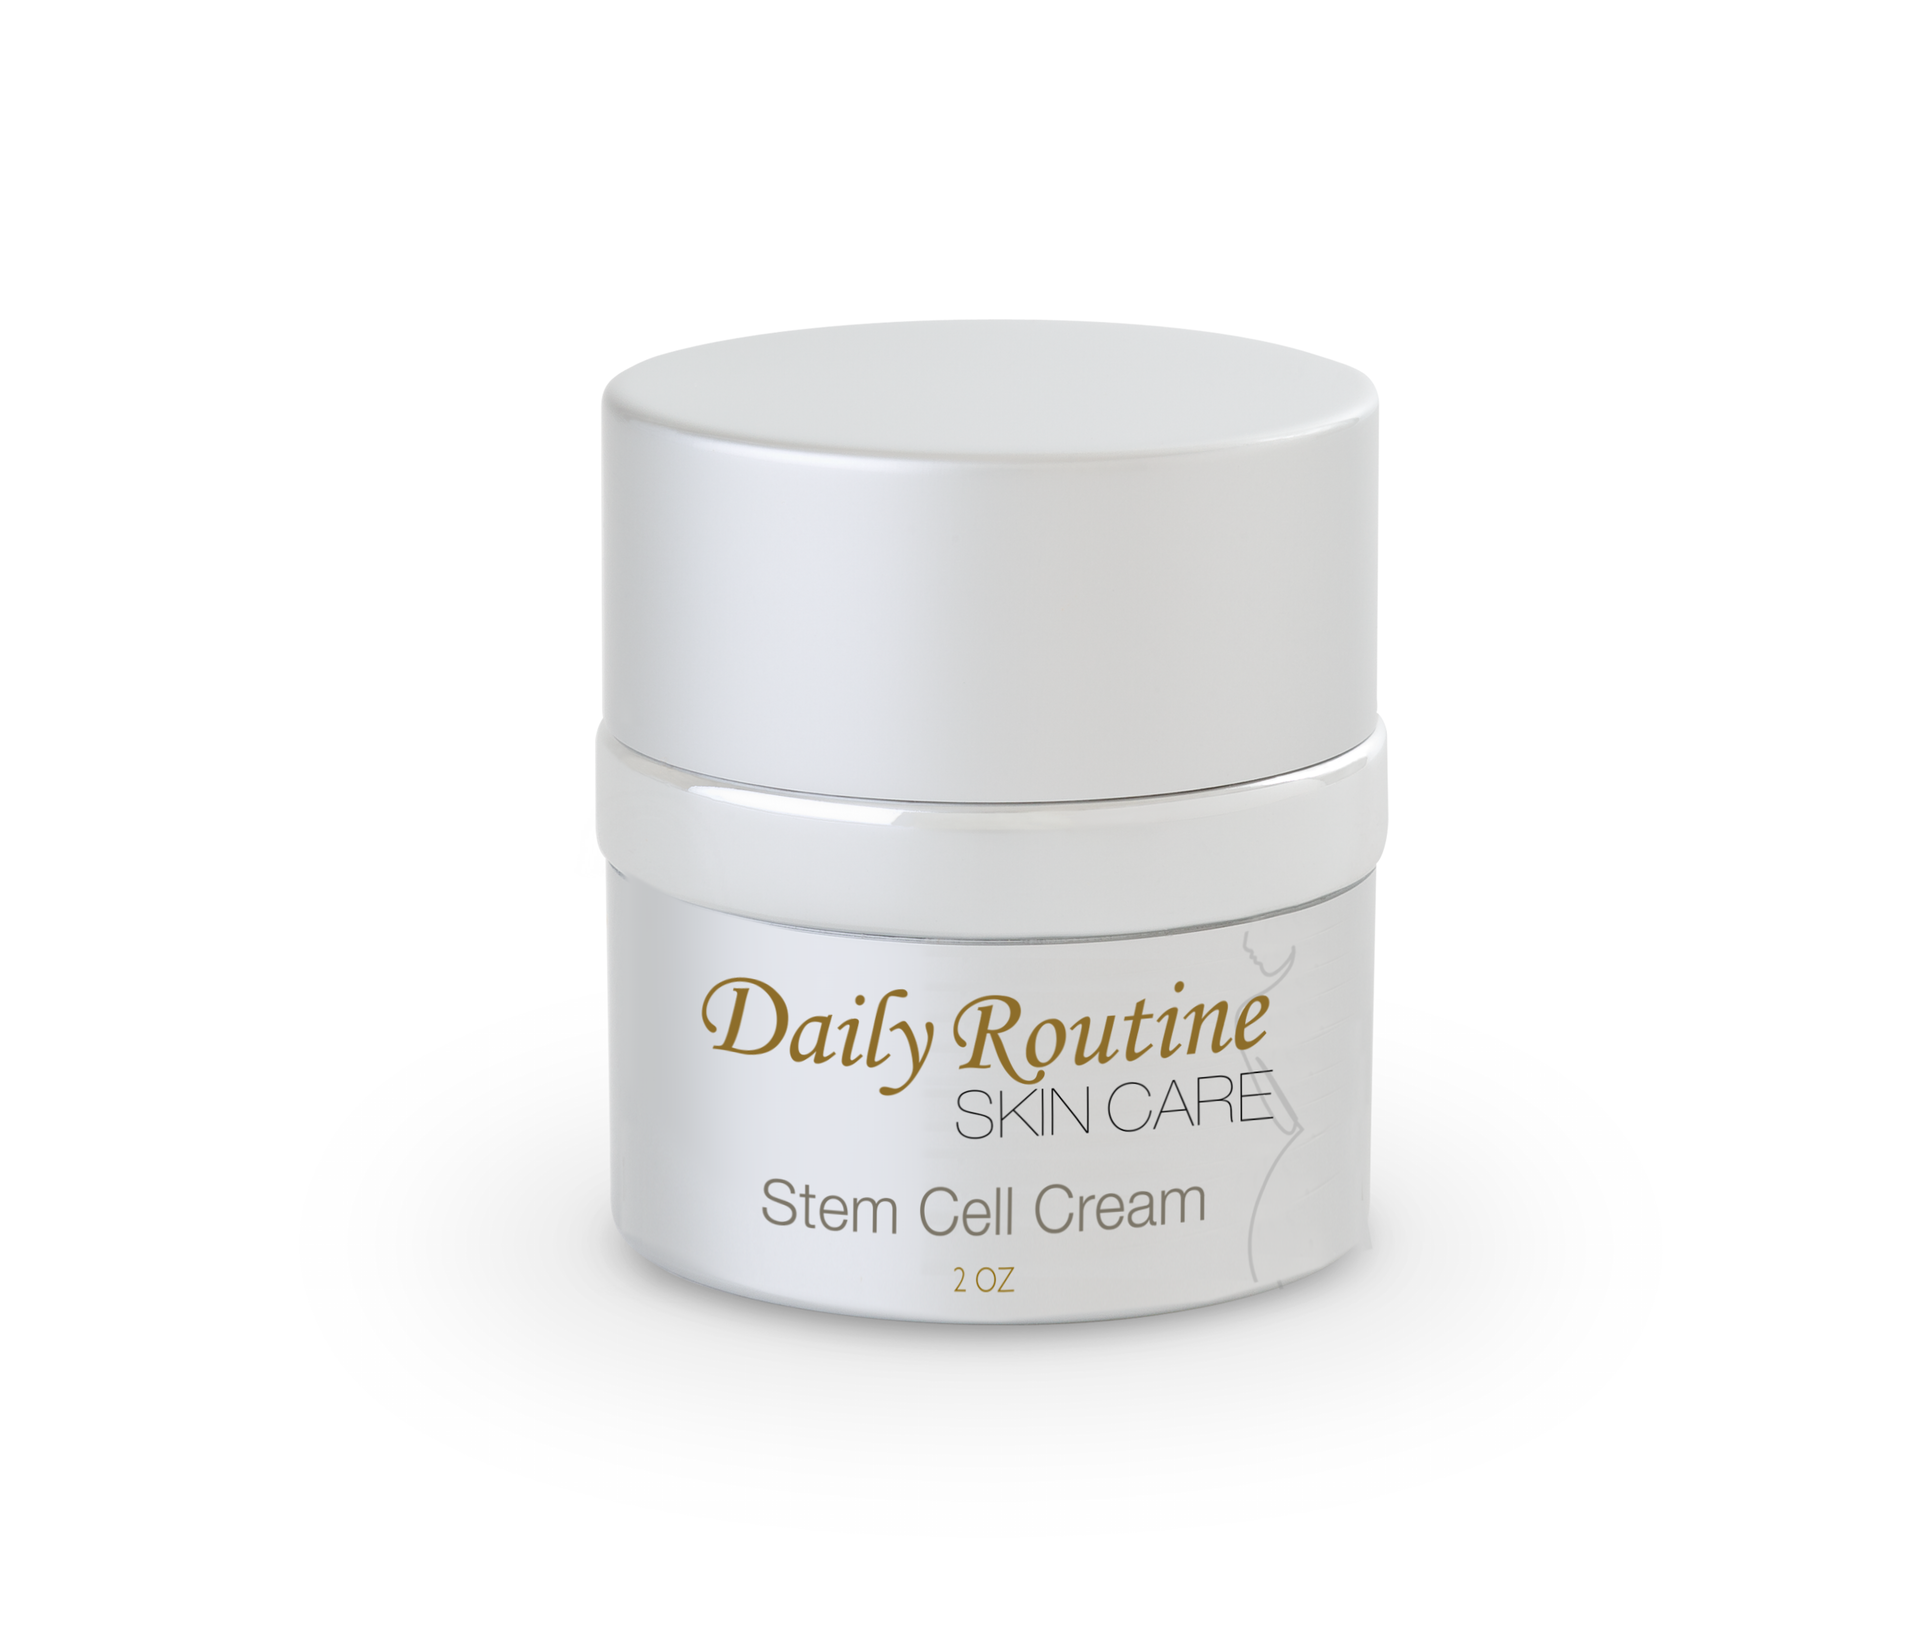 jar of Stem Cell Cream from Daily Routine Skin Care